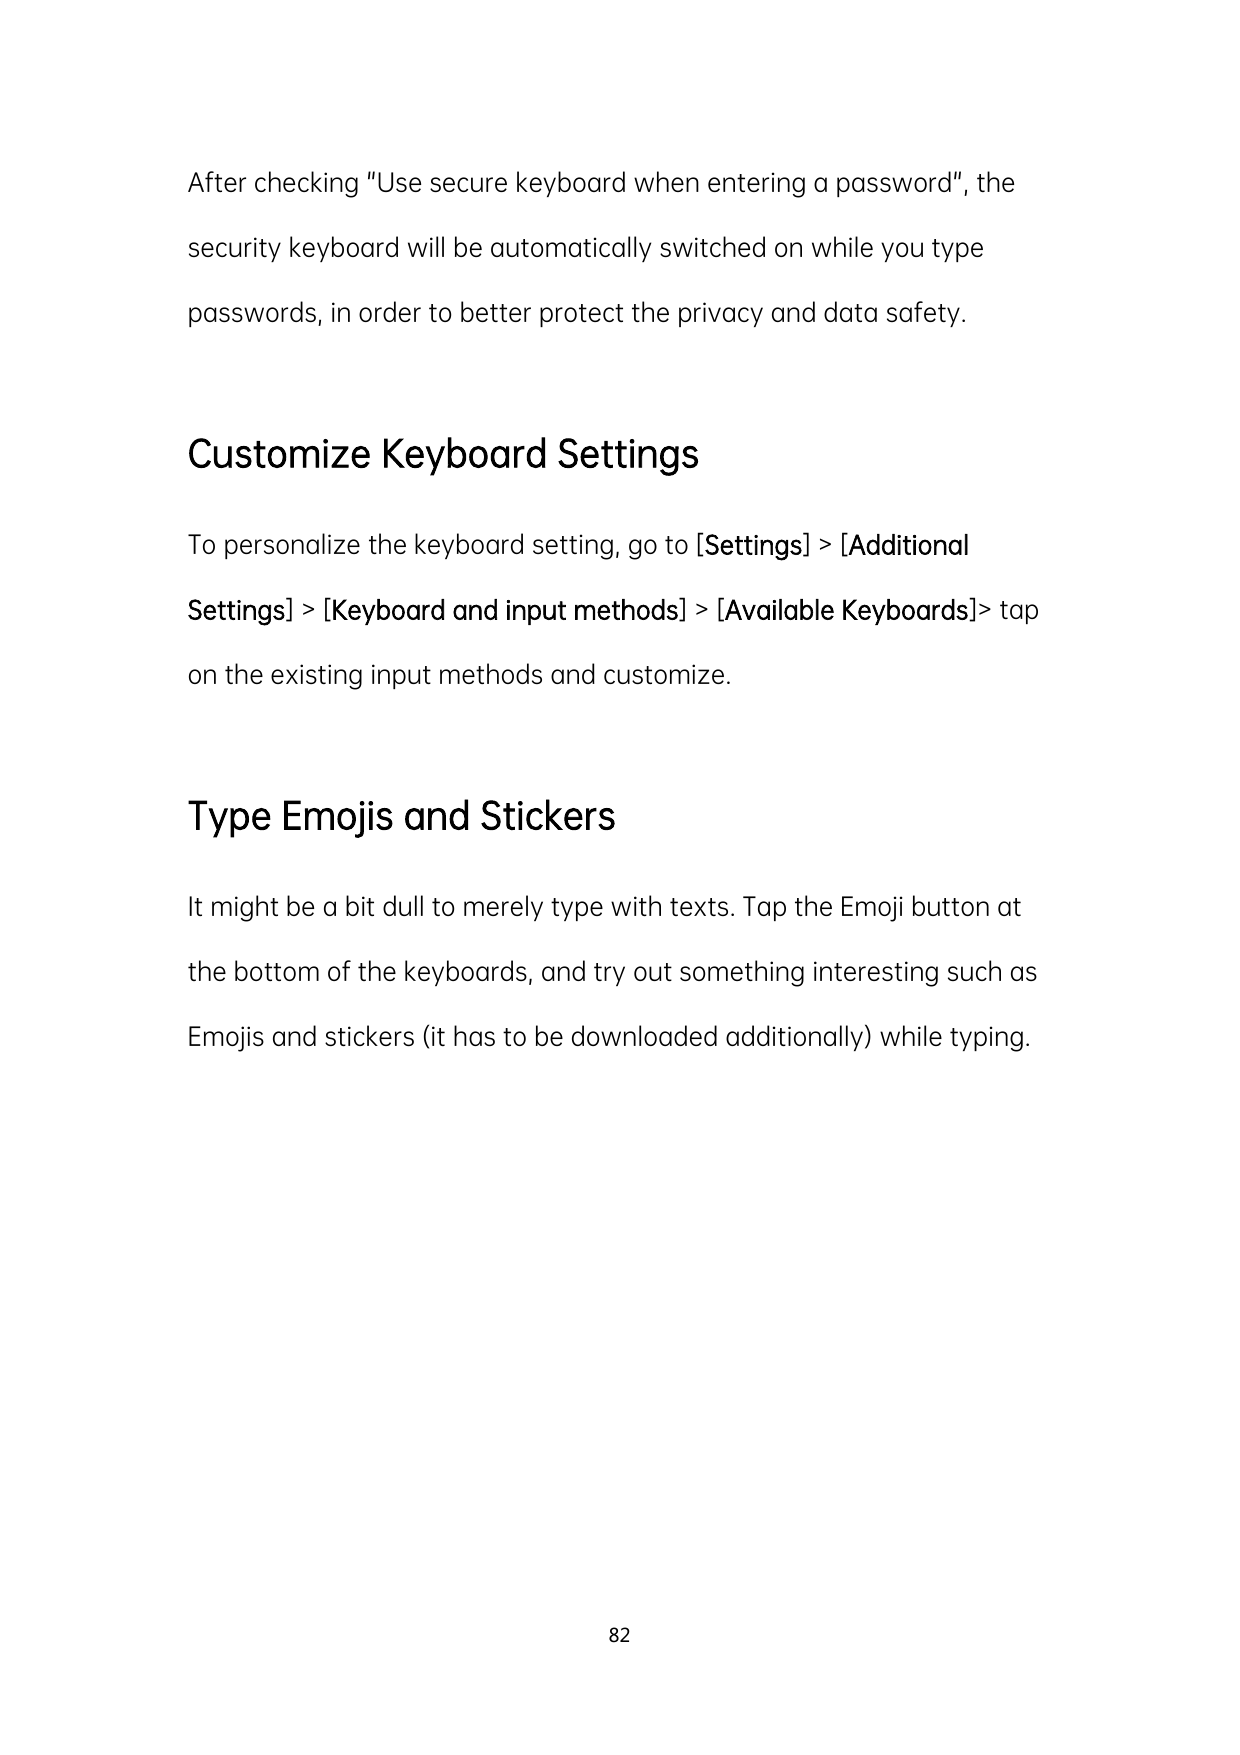 After checking "Use secure keyboard when entering a password", thesecurity keyboard will be automatically switched on while you 